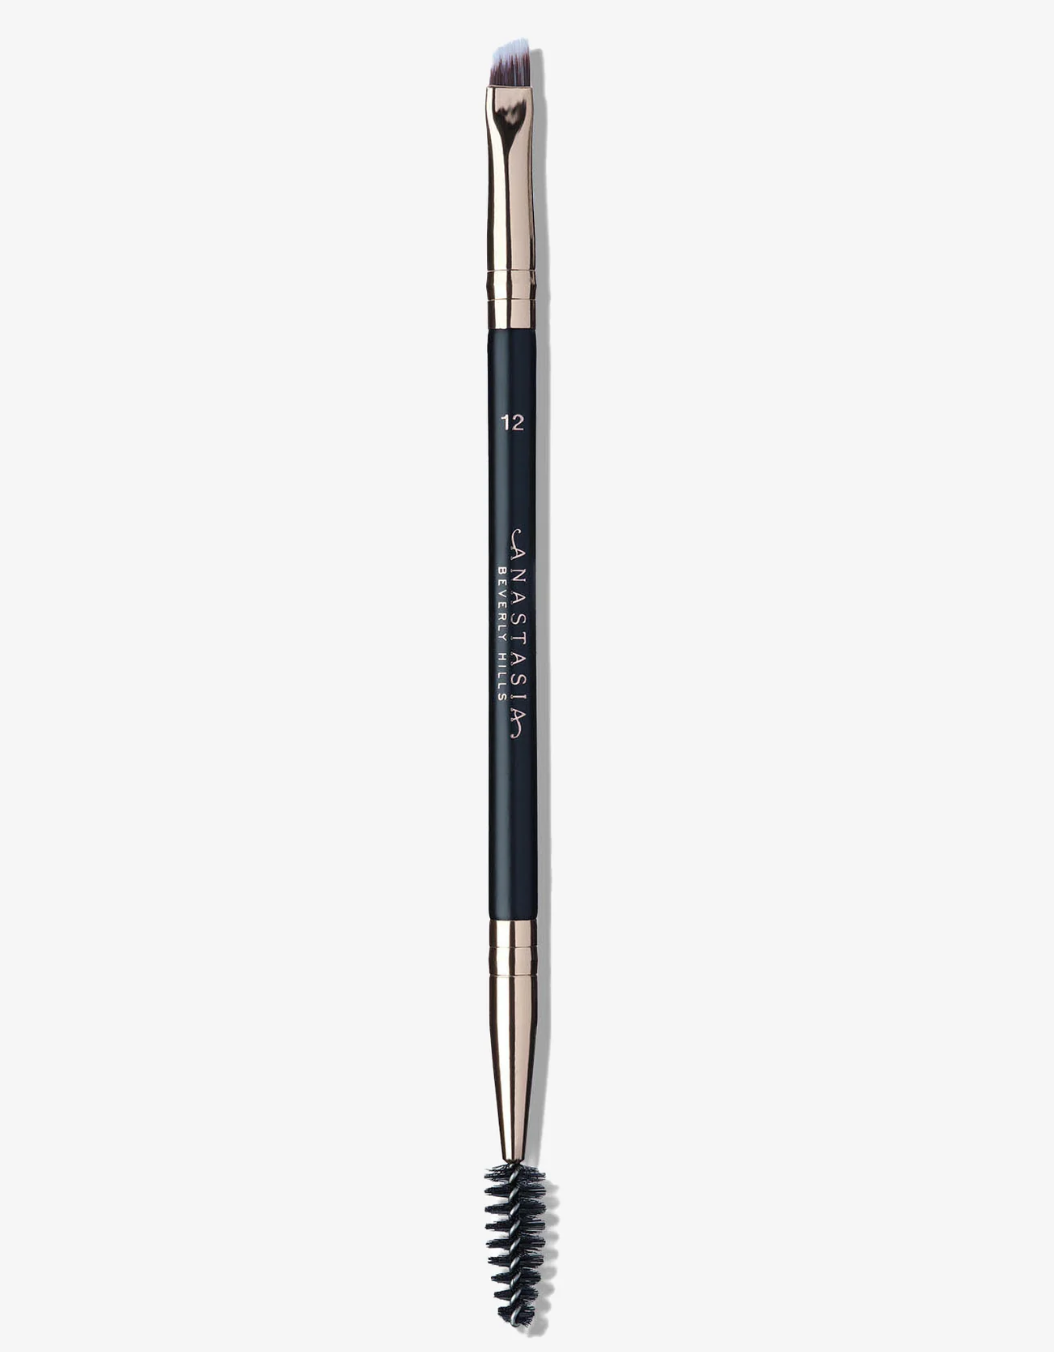 Anastasia Beverly Hills Brush 12 - Dual-Ended Firm Angled Eyebrow Spoolie - $14.40